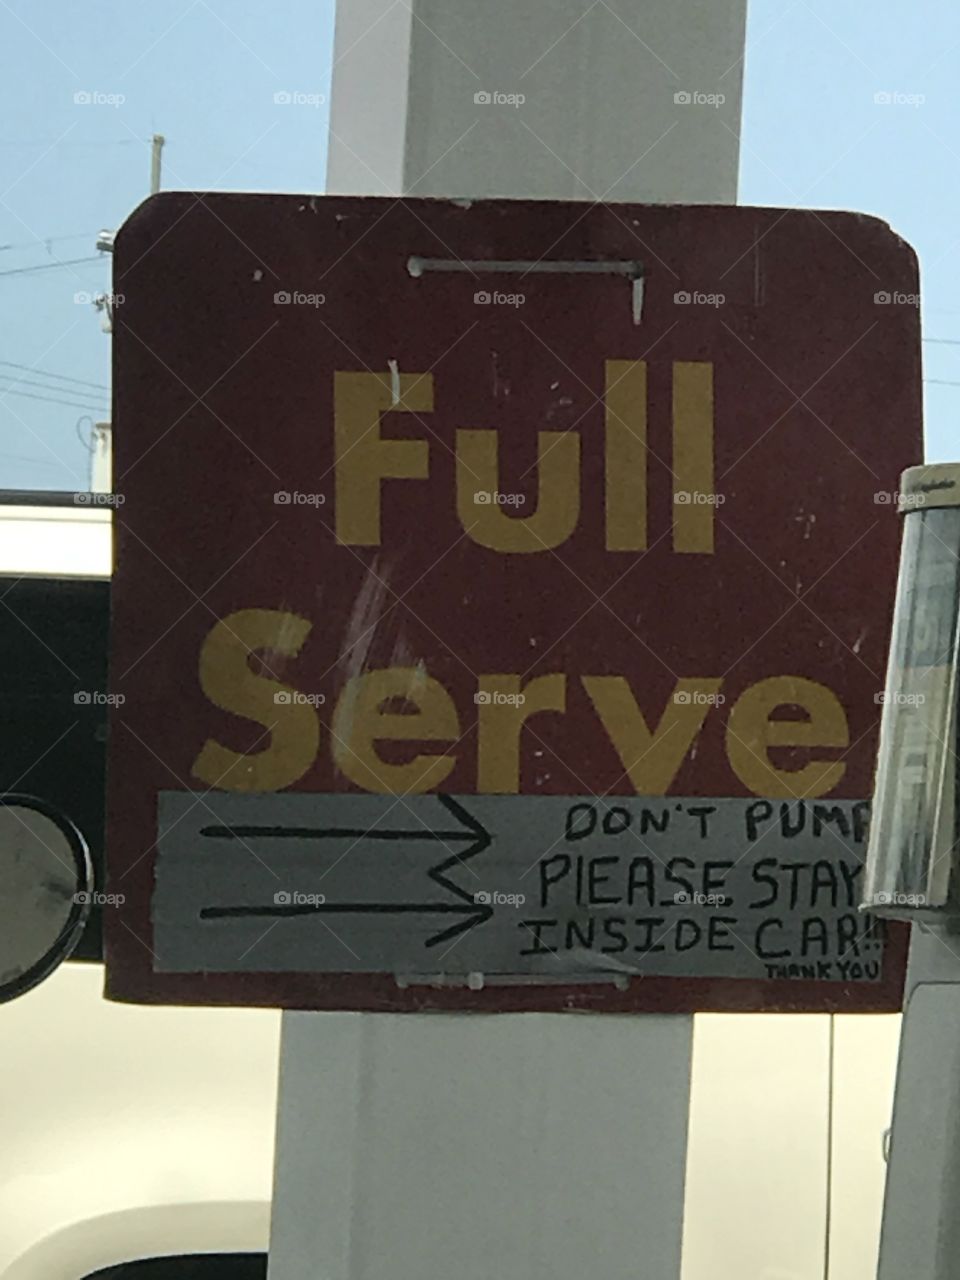 How long has it been since you saw a full service sign at the gas station.